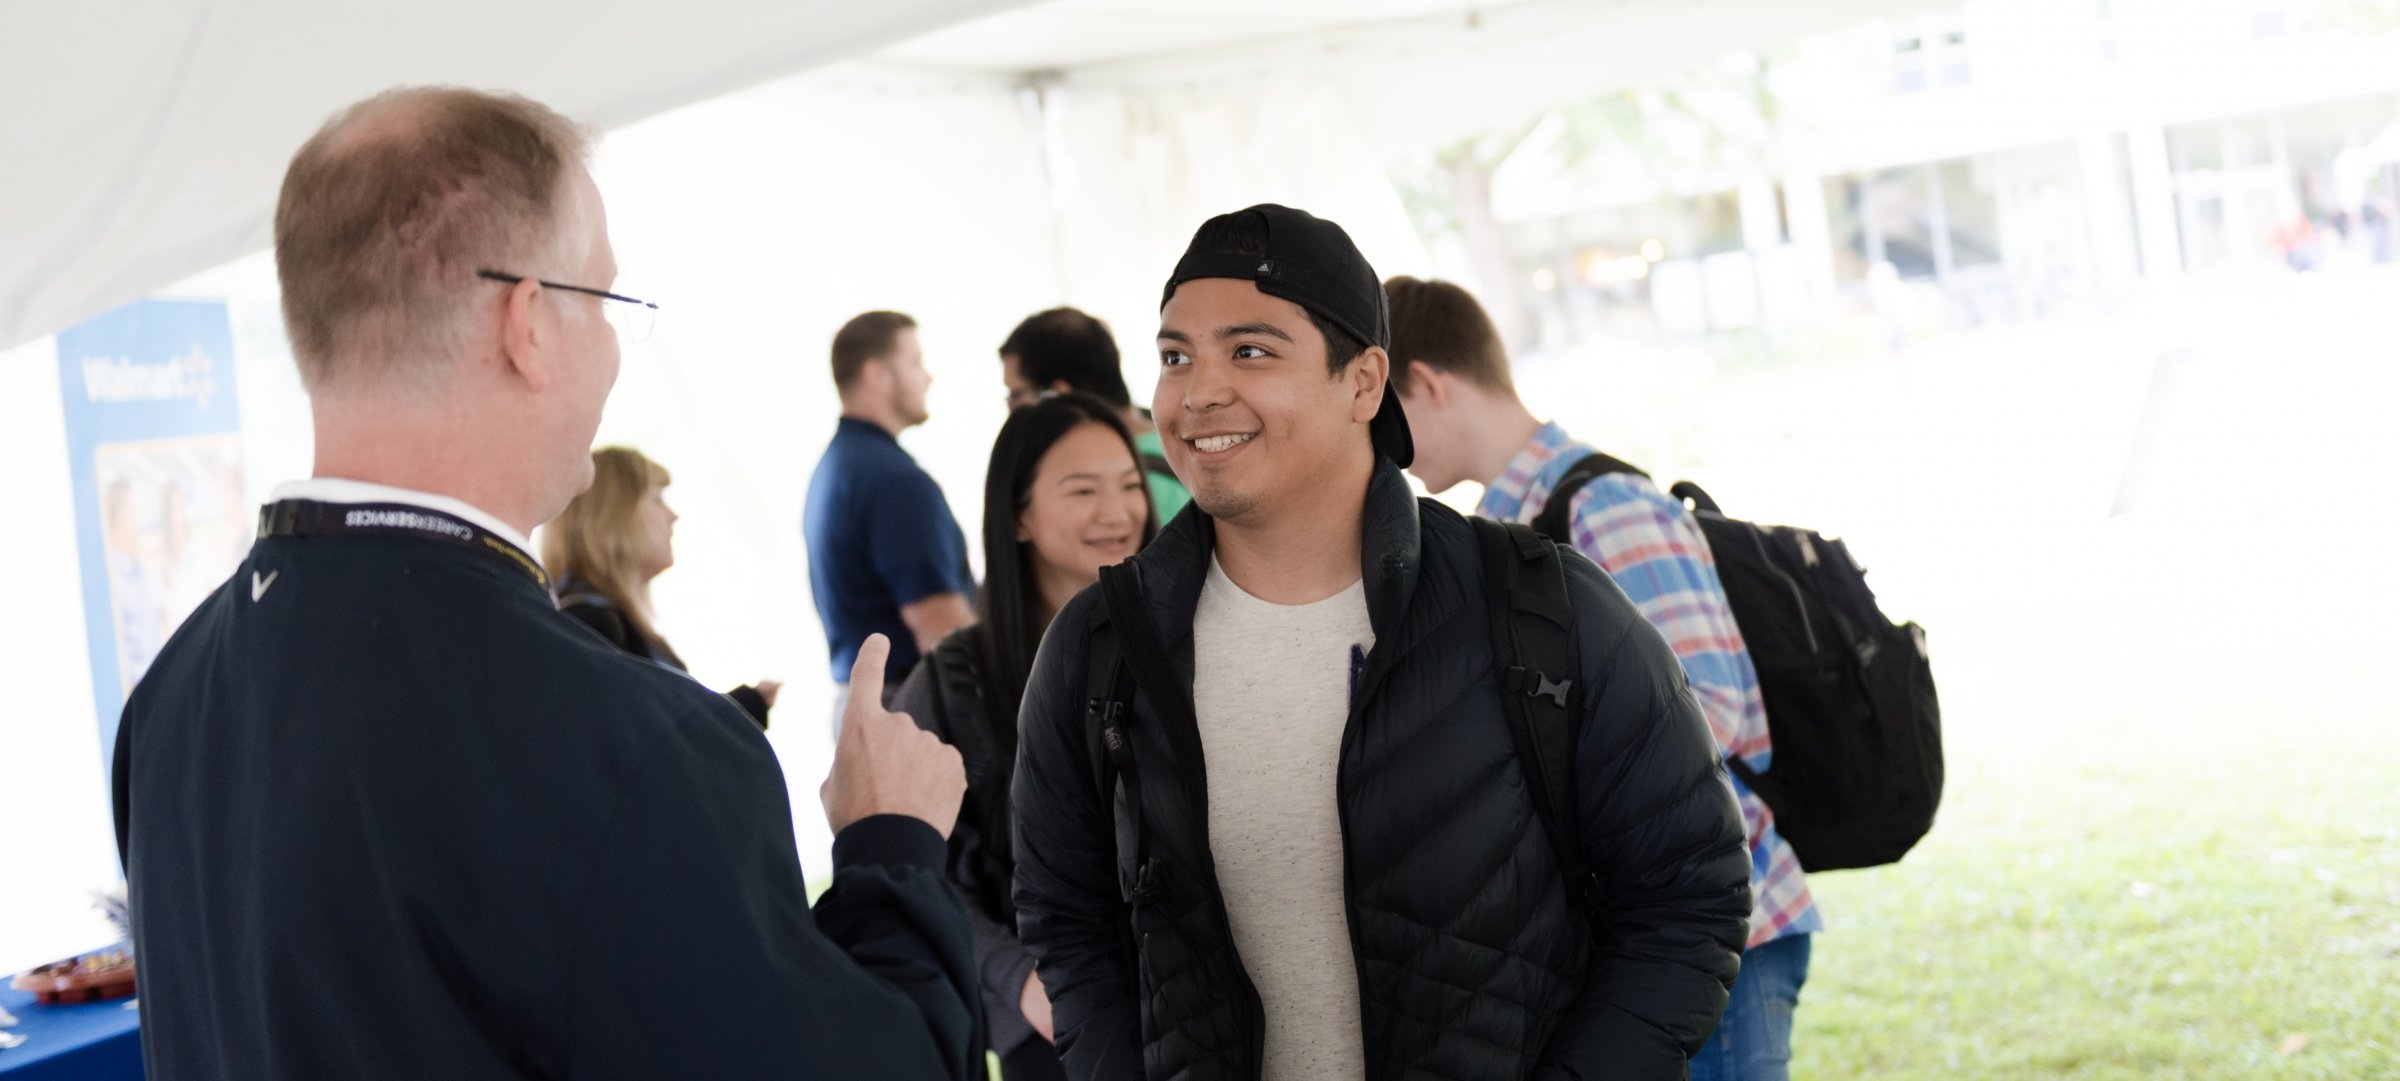 Student smiling at recruiter outside on campus